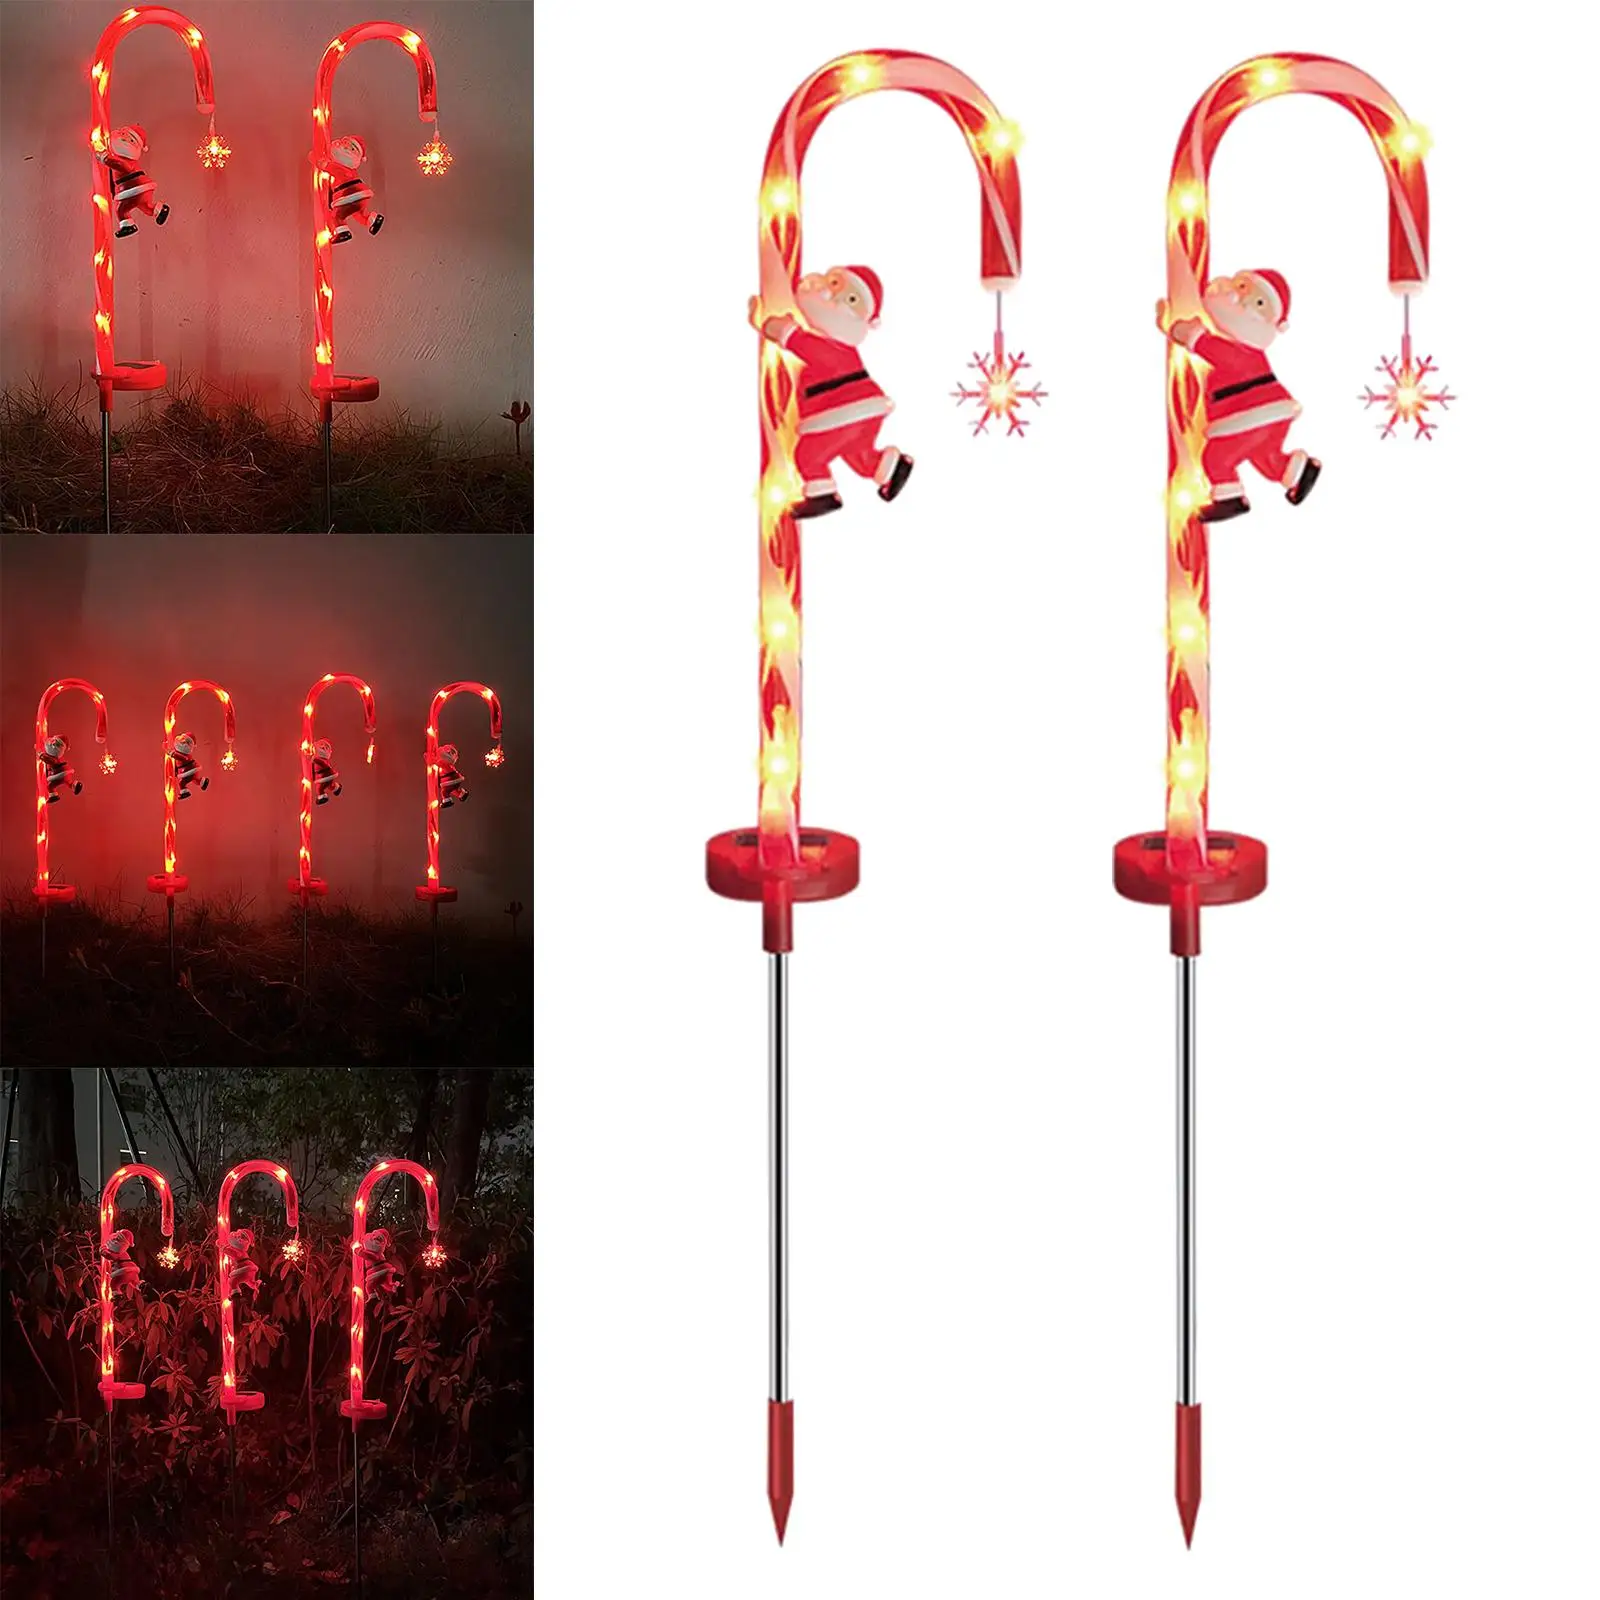 Waterproof Christmas LED Lamps Pathway Markers with Ground Stake Ornaments Candy Cane Solar Lights for Fence Backyard Patio Lawn